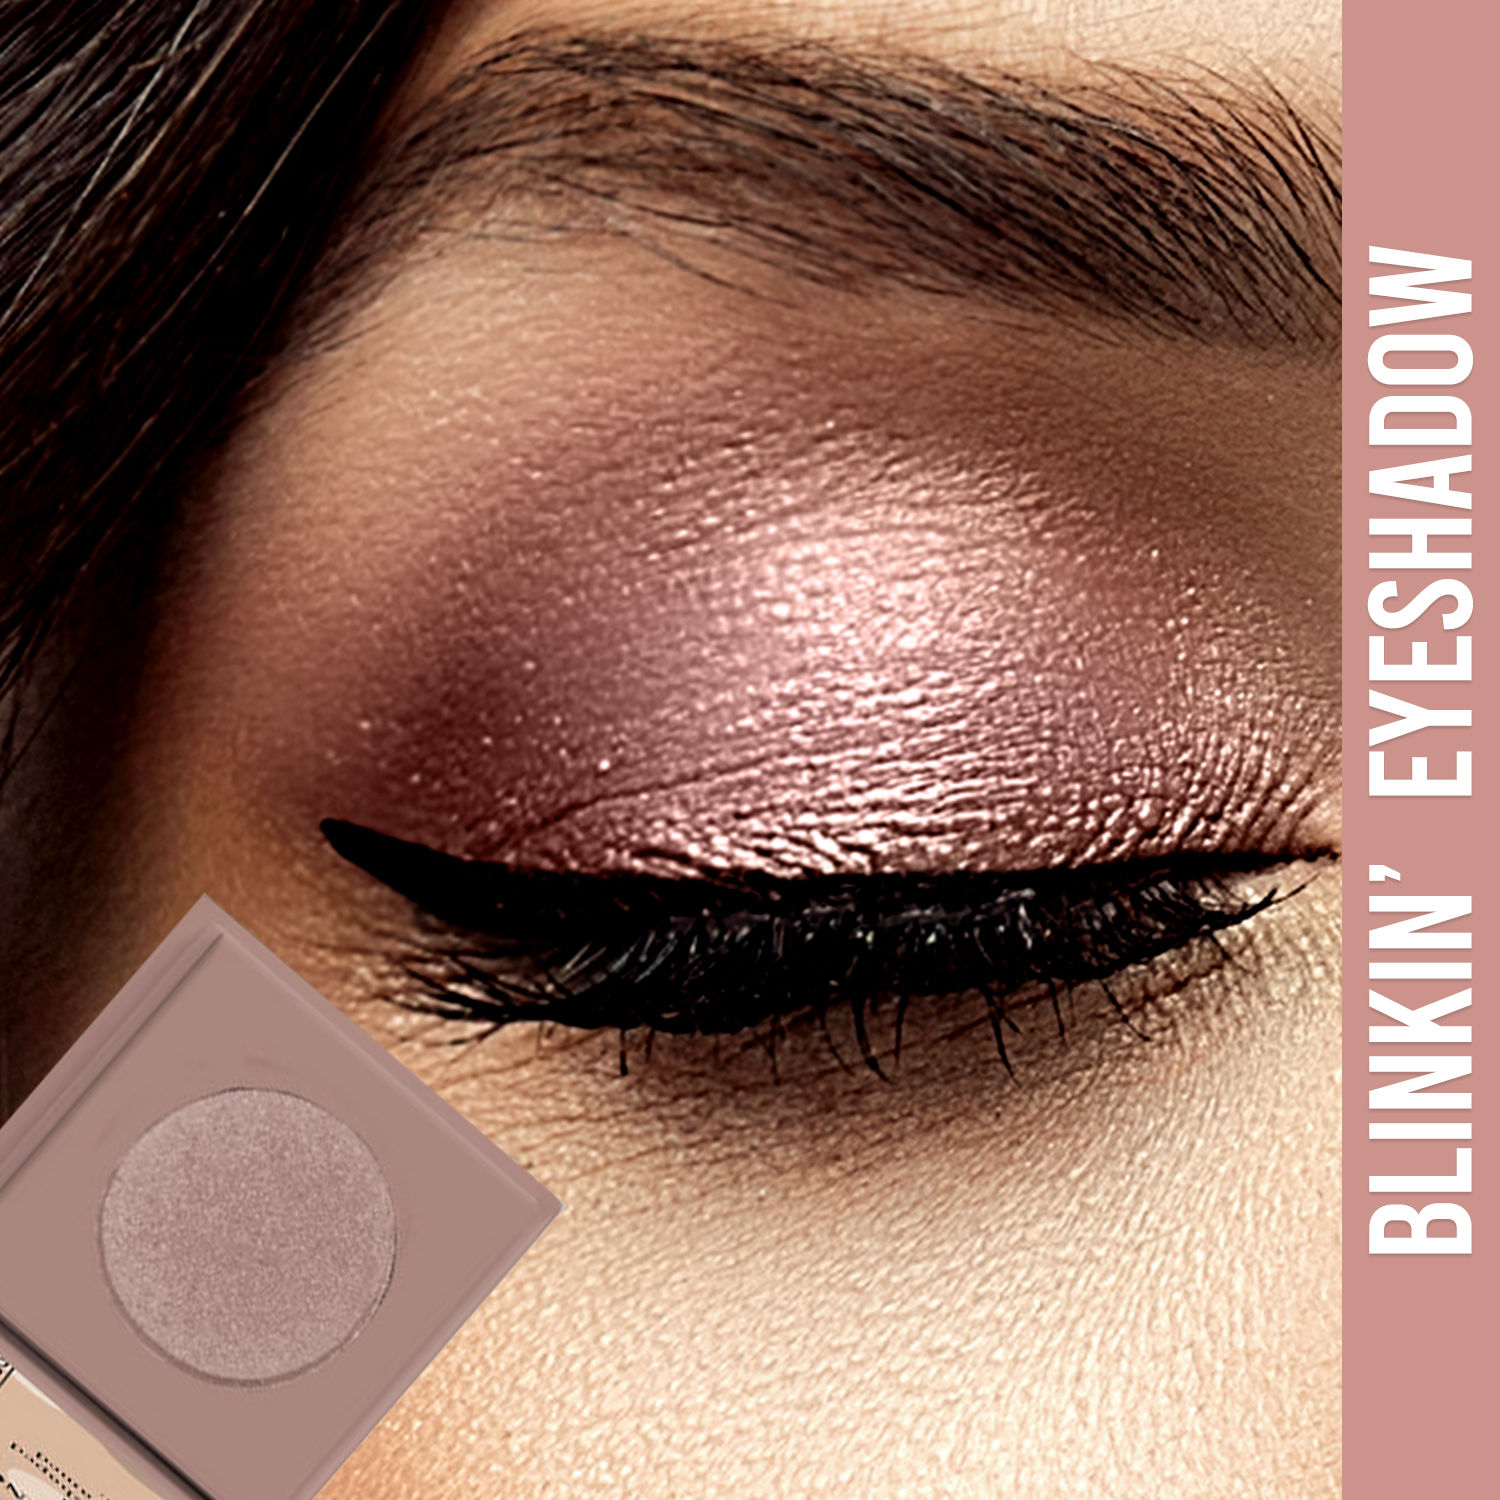 Buy NY Bae Blinkin' Eyeshadow| Pink| Shimmer| Highly Pigmented - Woolworth 18(1.2 g) - Purplle